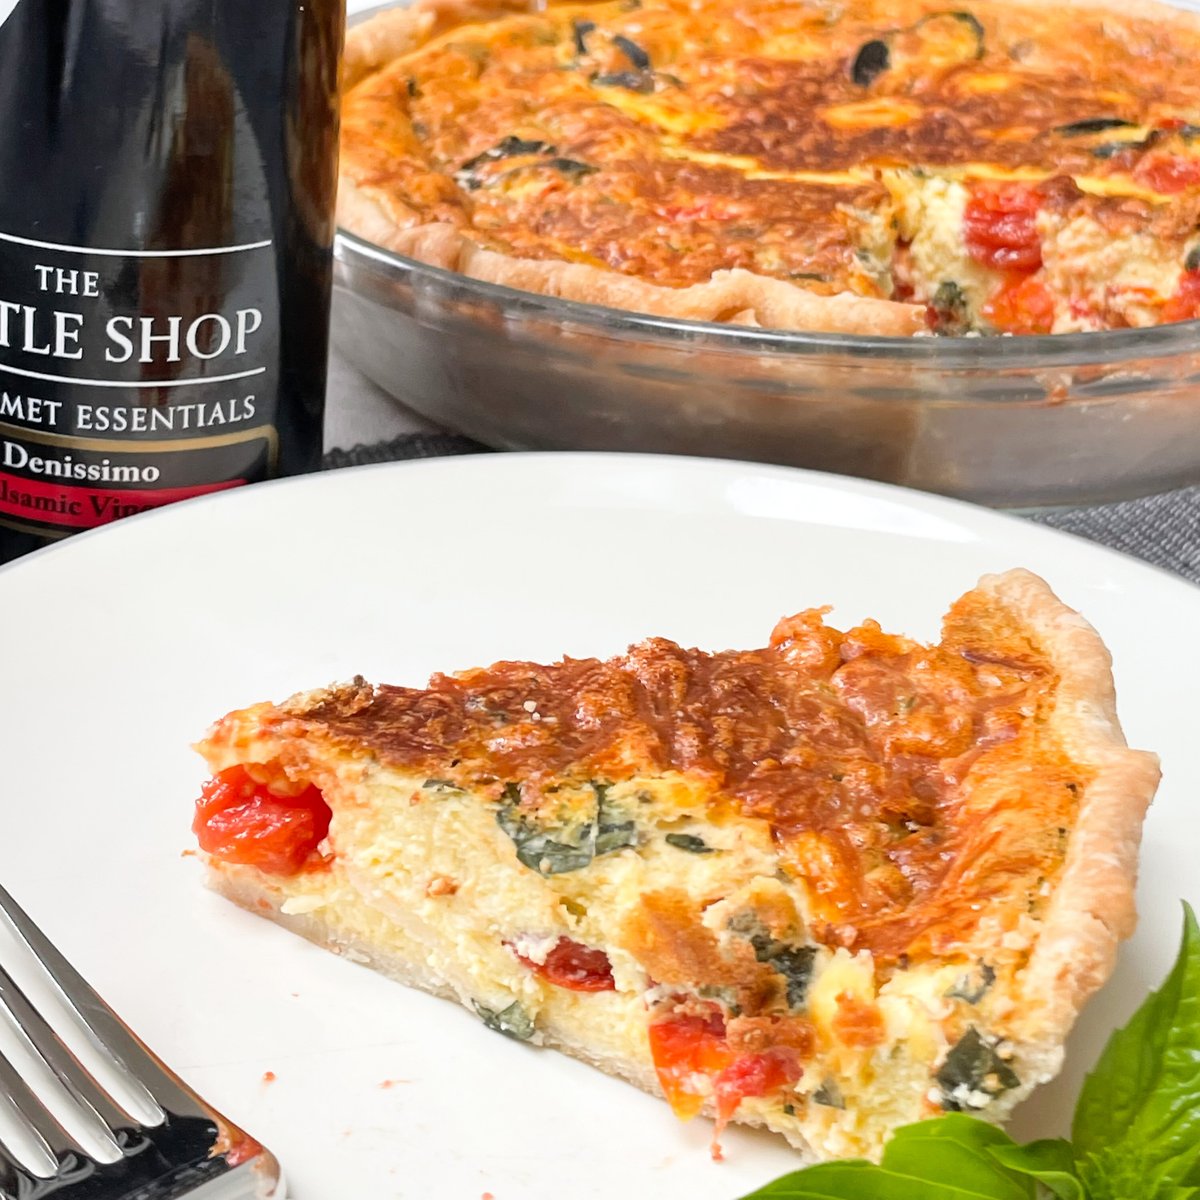 Fresh basil and local grape tomatoes made this quiche one of the tastiest I have ever made! Drizzled it with Denissimo Aged Balsamic before eating it, and I was in heaven! 
*
*
*
#howsweeteats #brunch #Denissimo #weekend #franklinfarmersmarket #NightOwlFarm #lovetobake